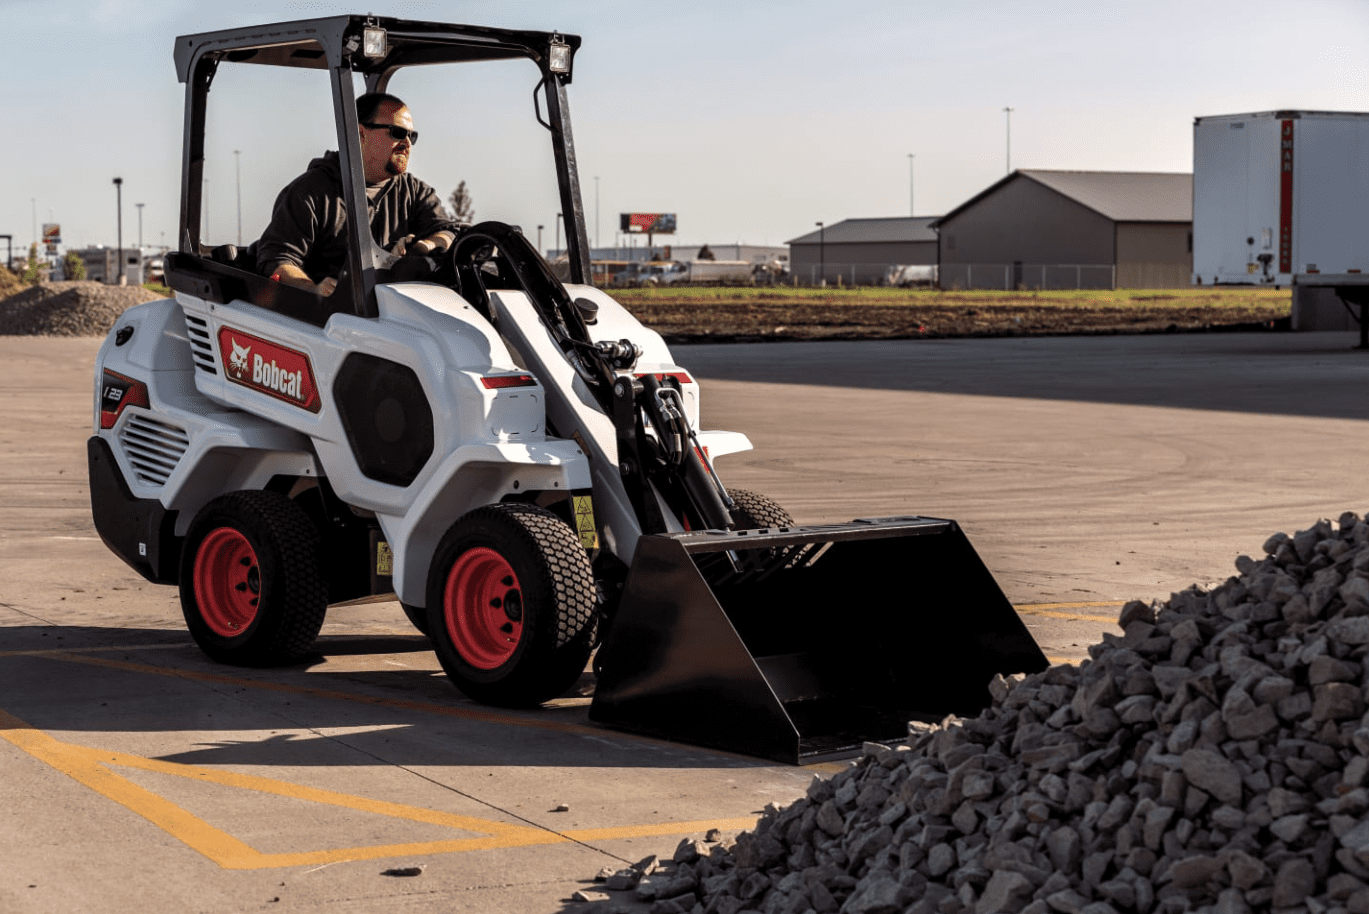 Browse Specs and more for the Bobcat L23 Small Articulated Loader - Bobcat of Huntsville